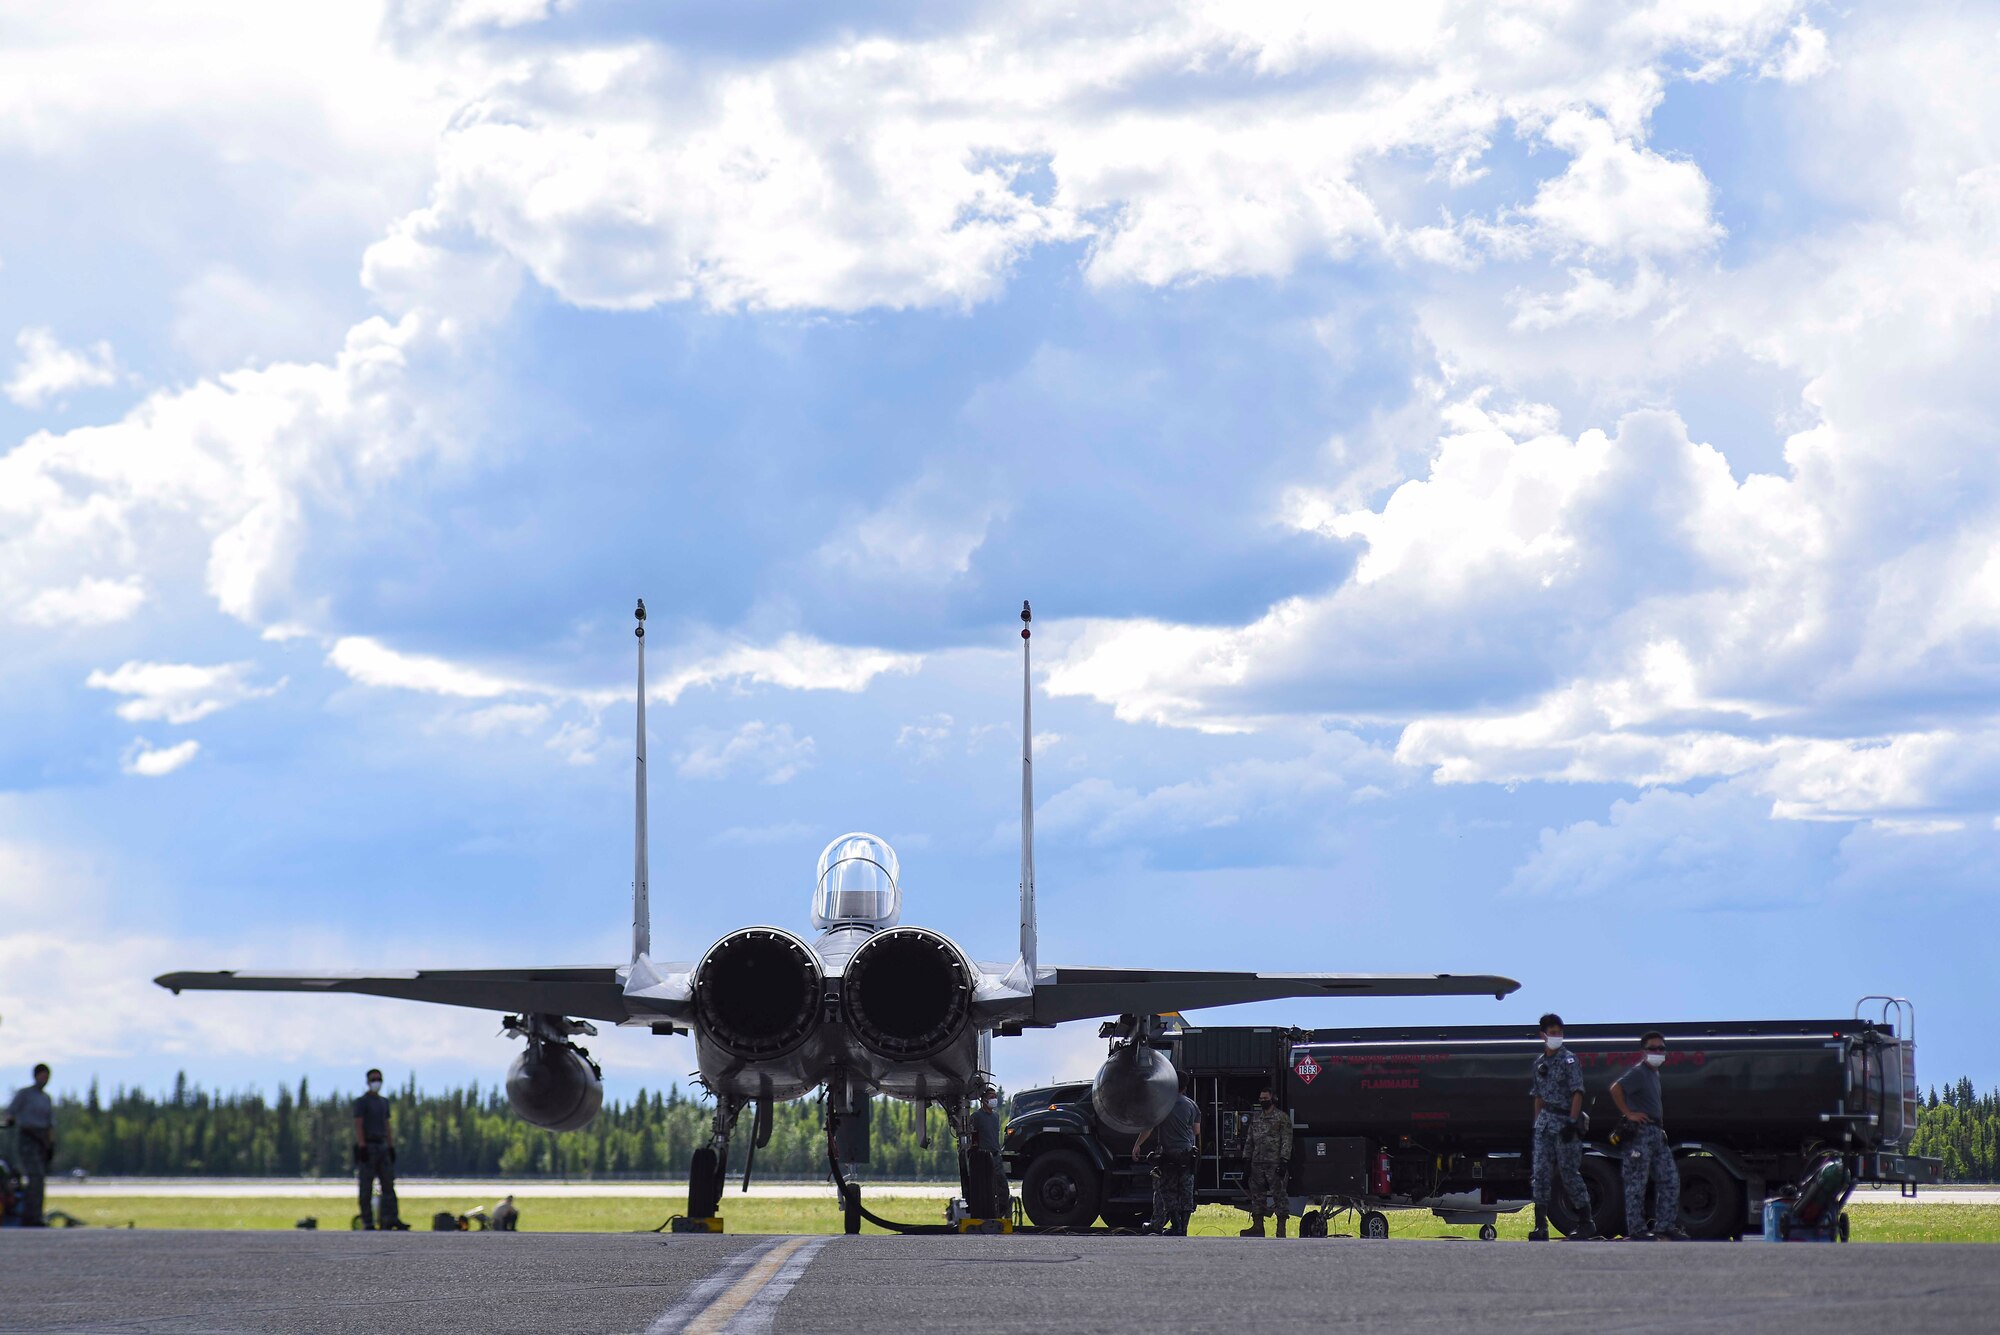 A Koku Jieitai (Japan Air Self-Defense Force) F-15J Eagle deployed from the 9th Air Wing, Naha Air Base, Japan, is refueled by 354th Logistics Readiness Squadron Petroleum, Oil and Lubricants Airmen, and the aircraft maintenance crew, June 8, 2021, on Eielson Air Force Base, Alaska. Allied nations began multilateral training before RED FLAG-Alaska 21-2 to learn the training airspace and operating procedures of the 354th Fighter Wing. (U.S. Air Force photo by Senior Airman Keith Holcomb)